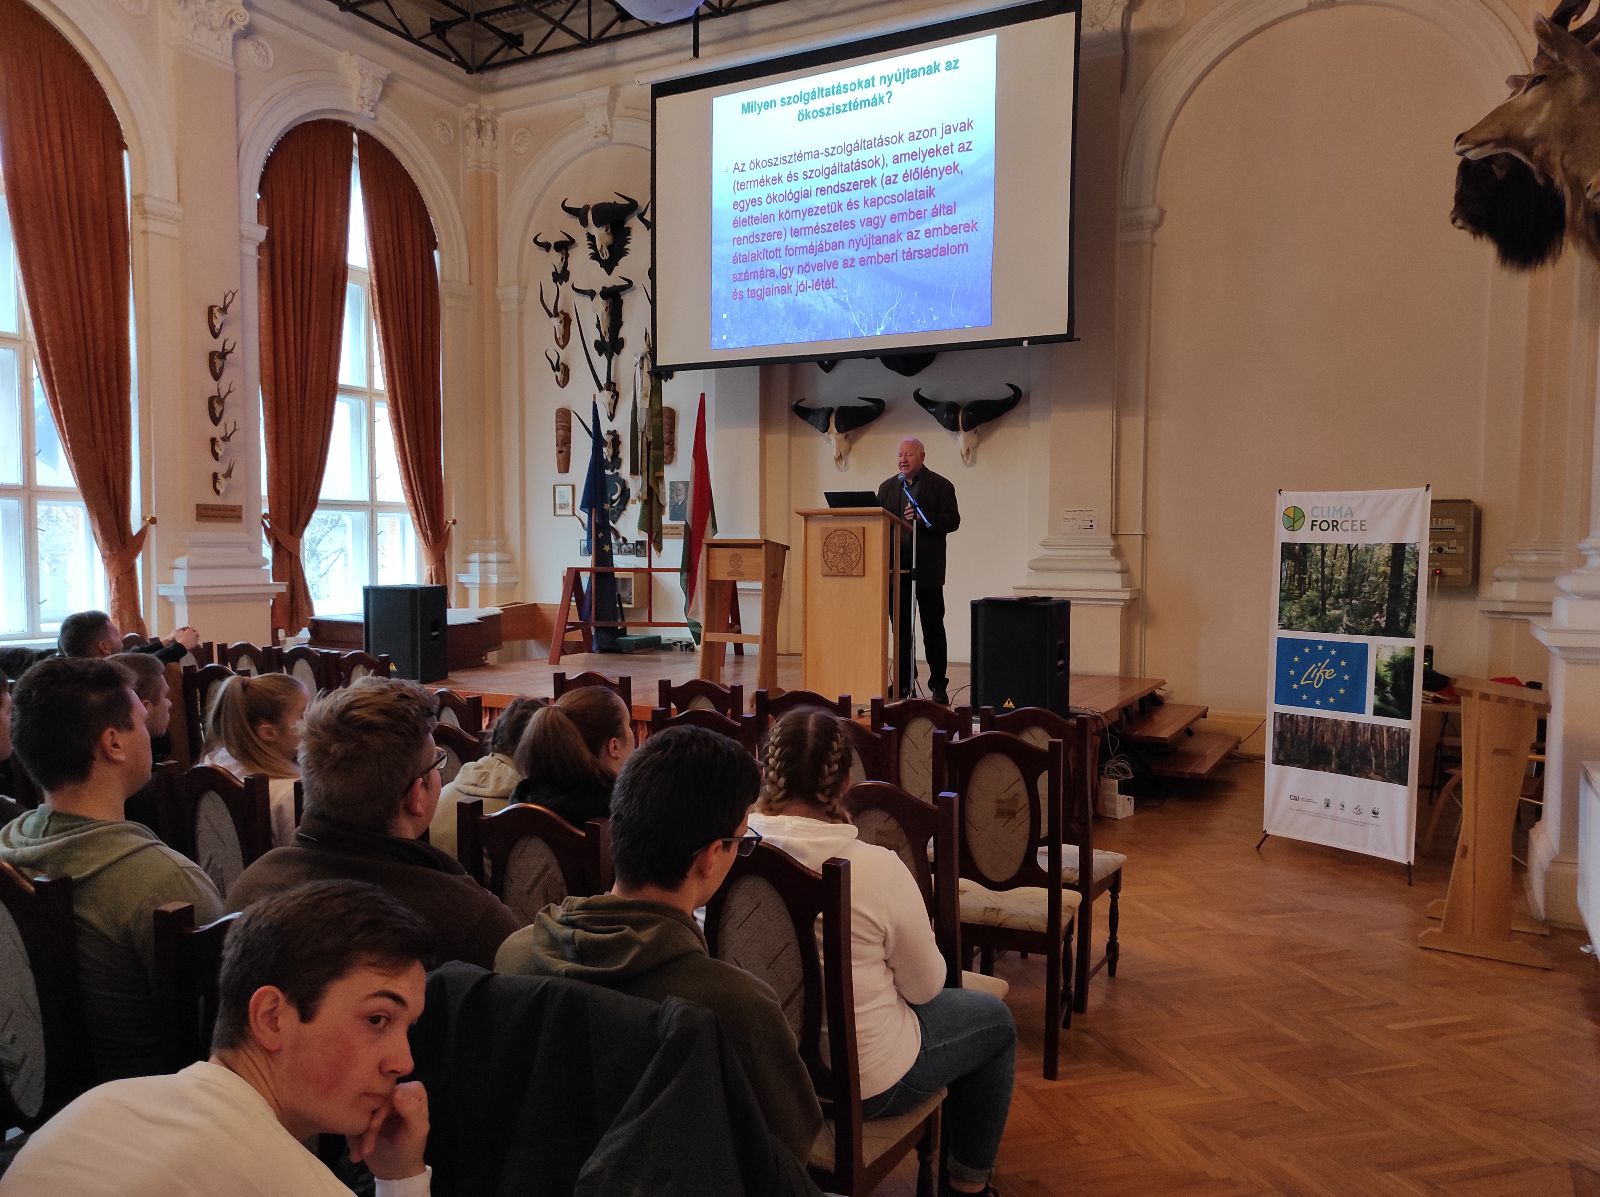 The series of lectures for forestry vocational school students continued in Hungary